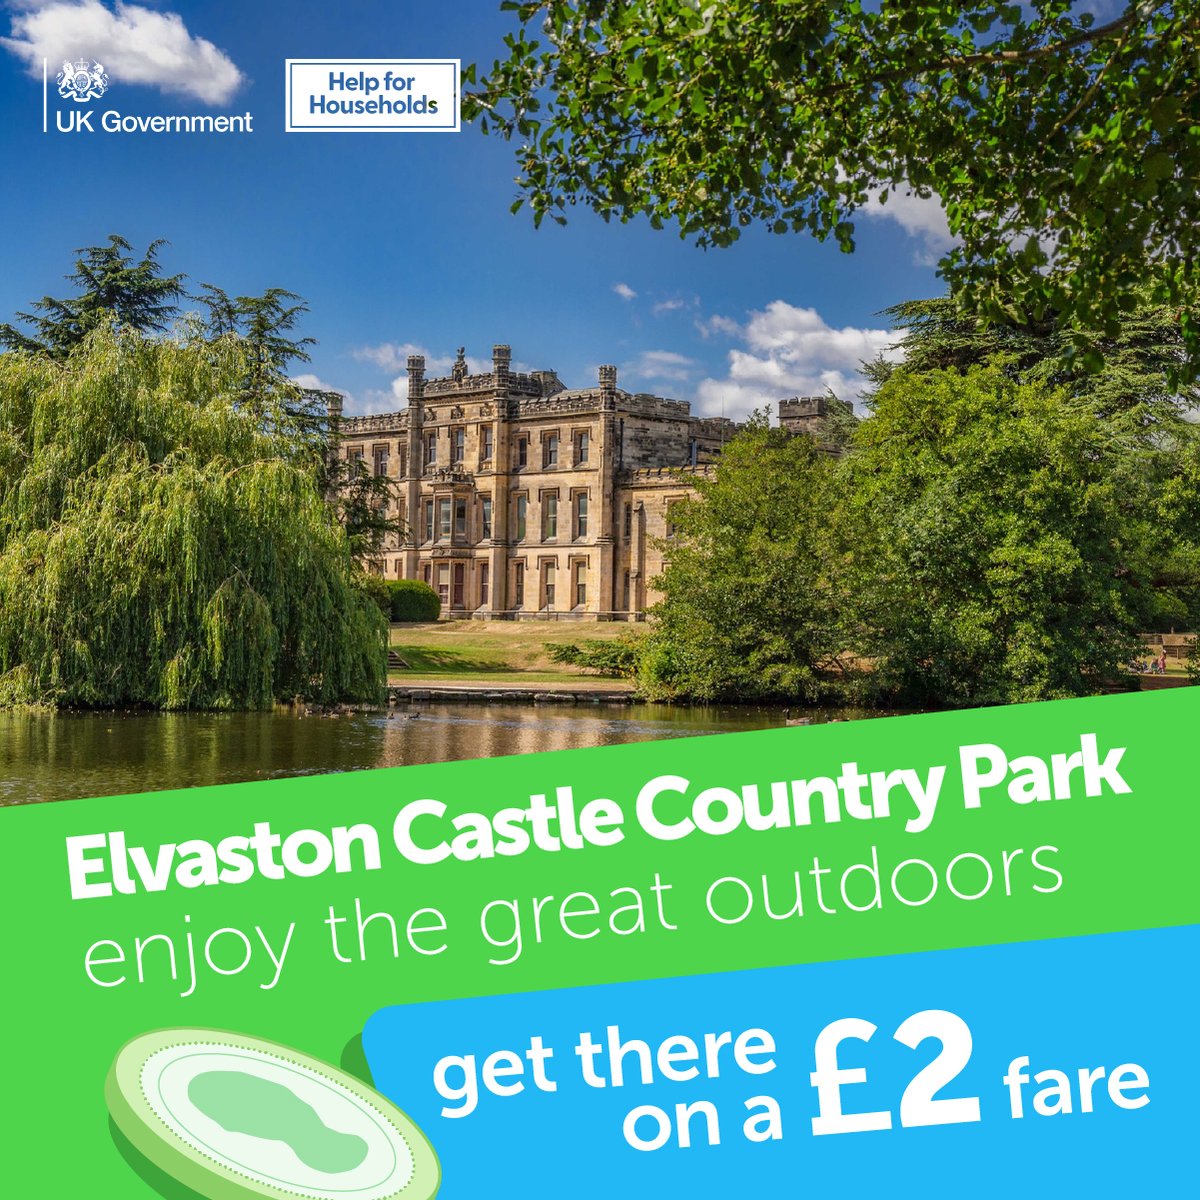 Enjoy some fresh air and discover new destinations🌳 Elvaston Castle Country Park is a historic estate with parkland, woodland and gardens near to Derby and Nottingham. Let us take you there on the £2 fare 🚍 Plan your trip today ⤵️ orlo.uk/5NSft